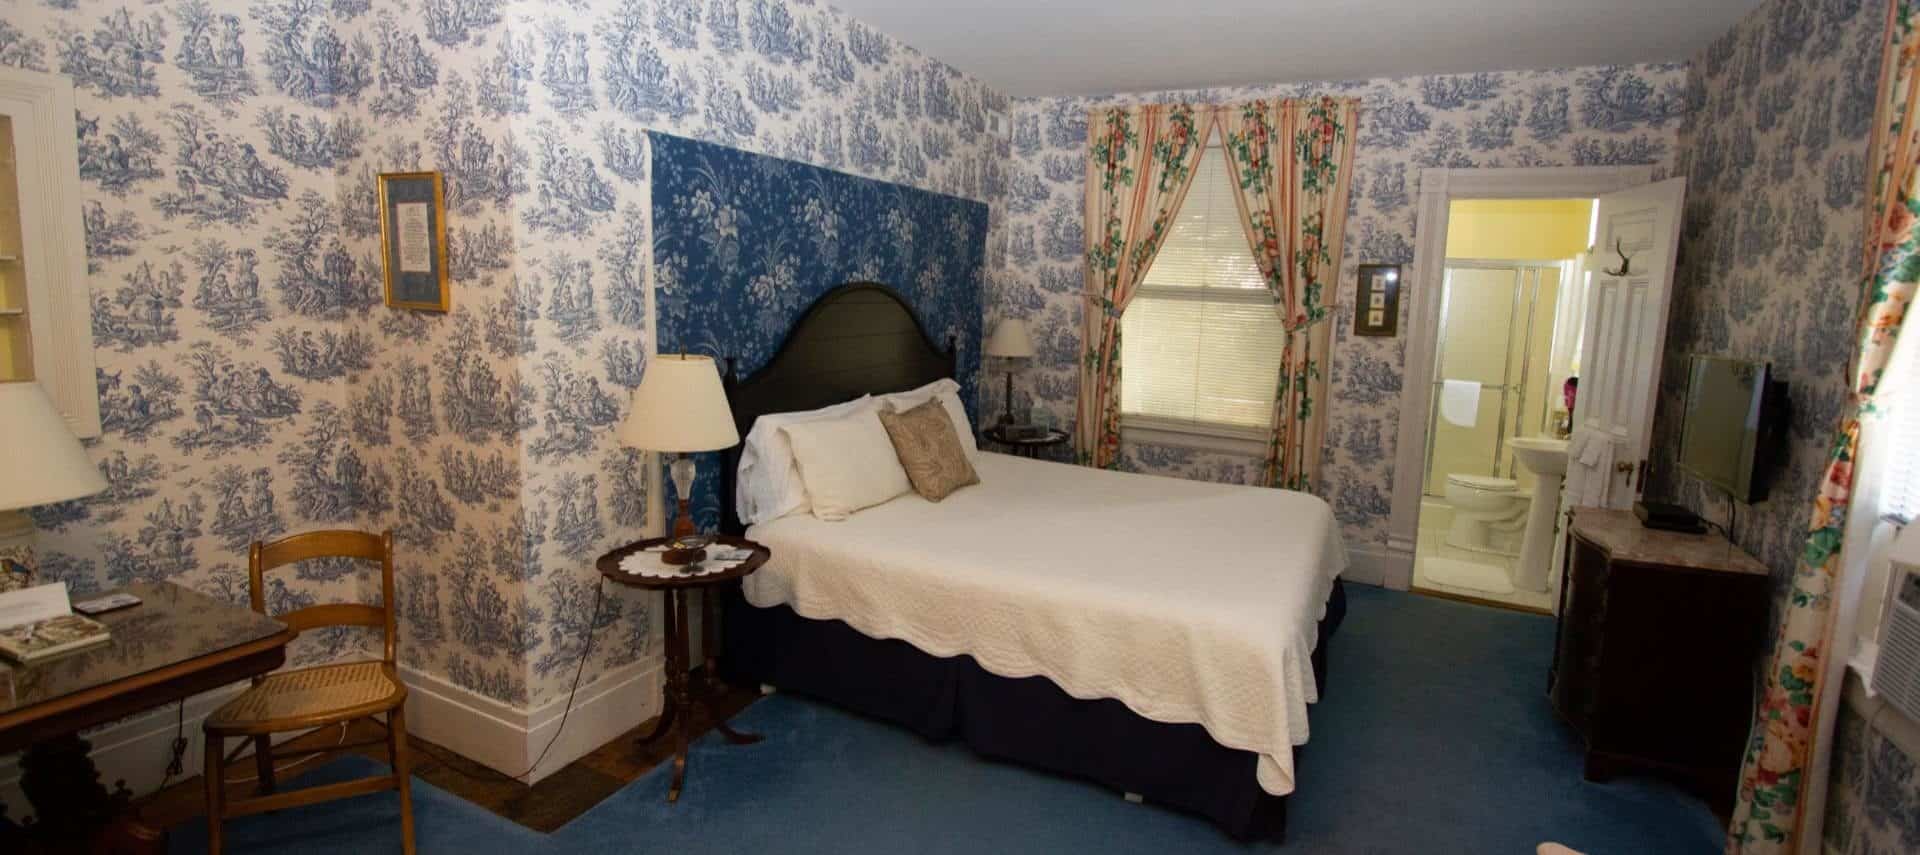 Bedroom with blue and white Victorian wall paper, blue carpet, dark wood bed with white linens, and view into the bathroom